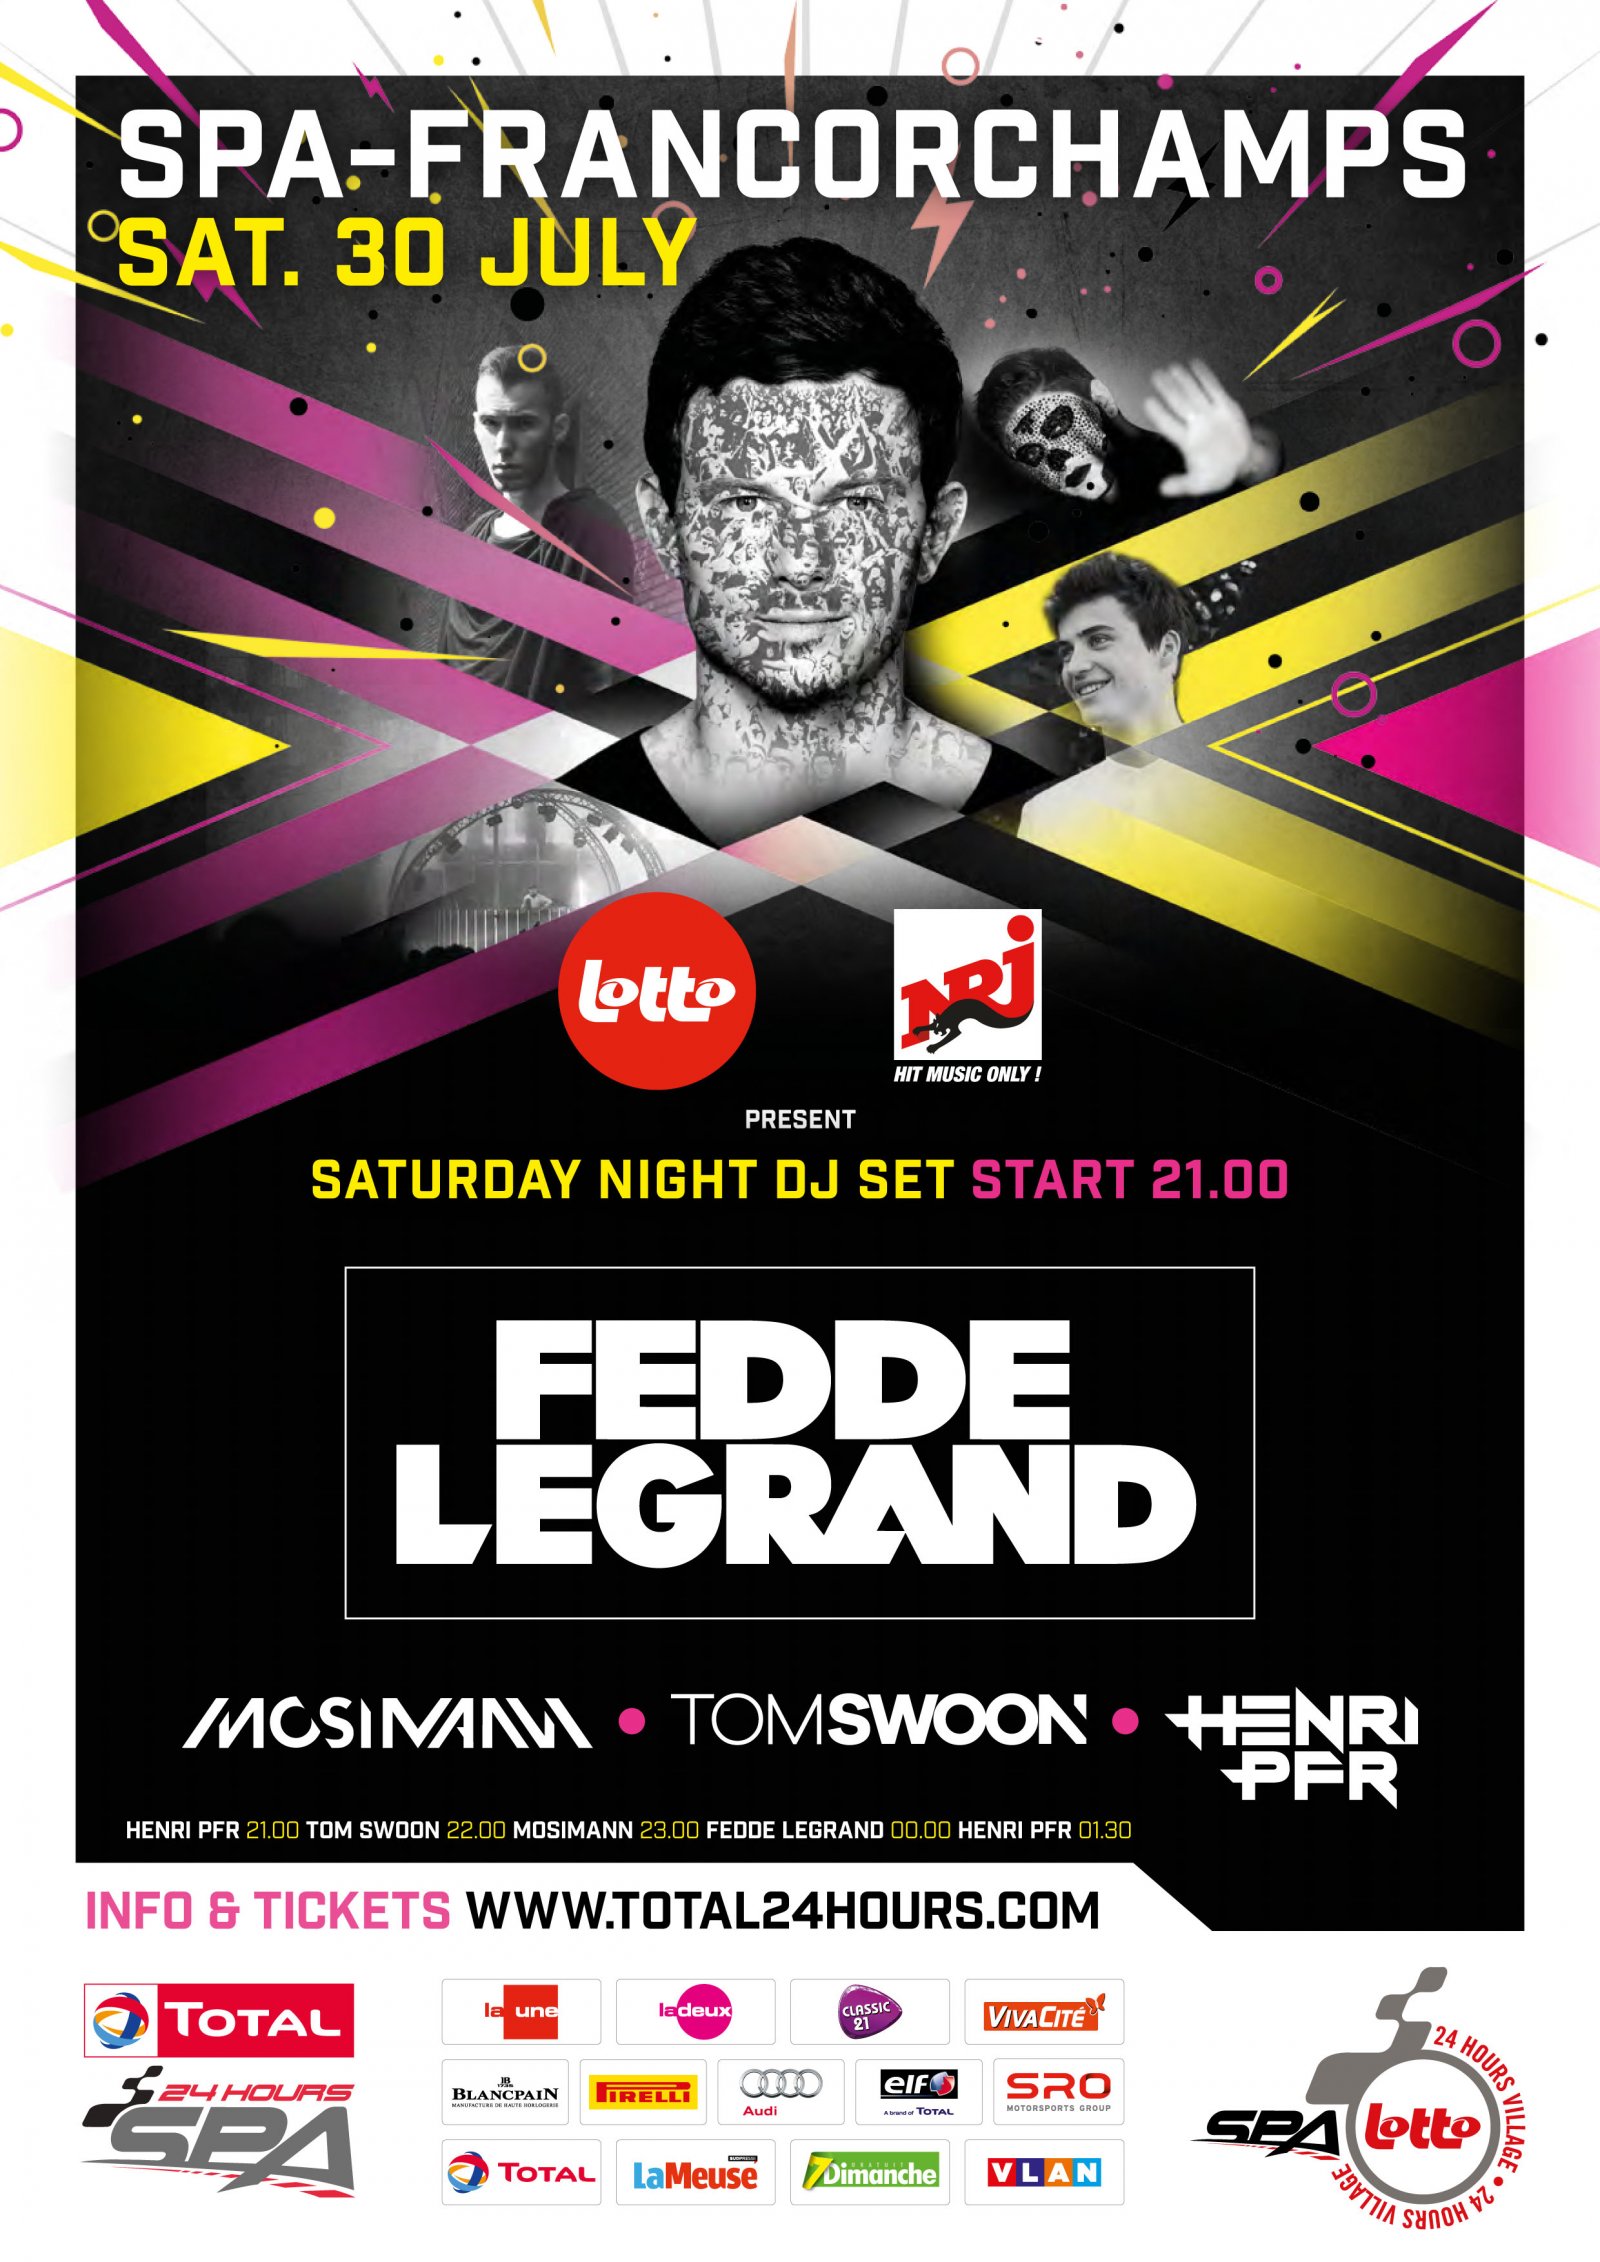 Fedde Le Grand headliner for the Total 24 Hours of Spa concert in the Lotto Village